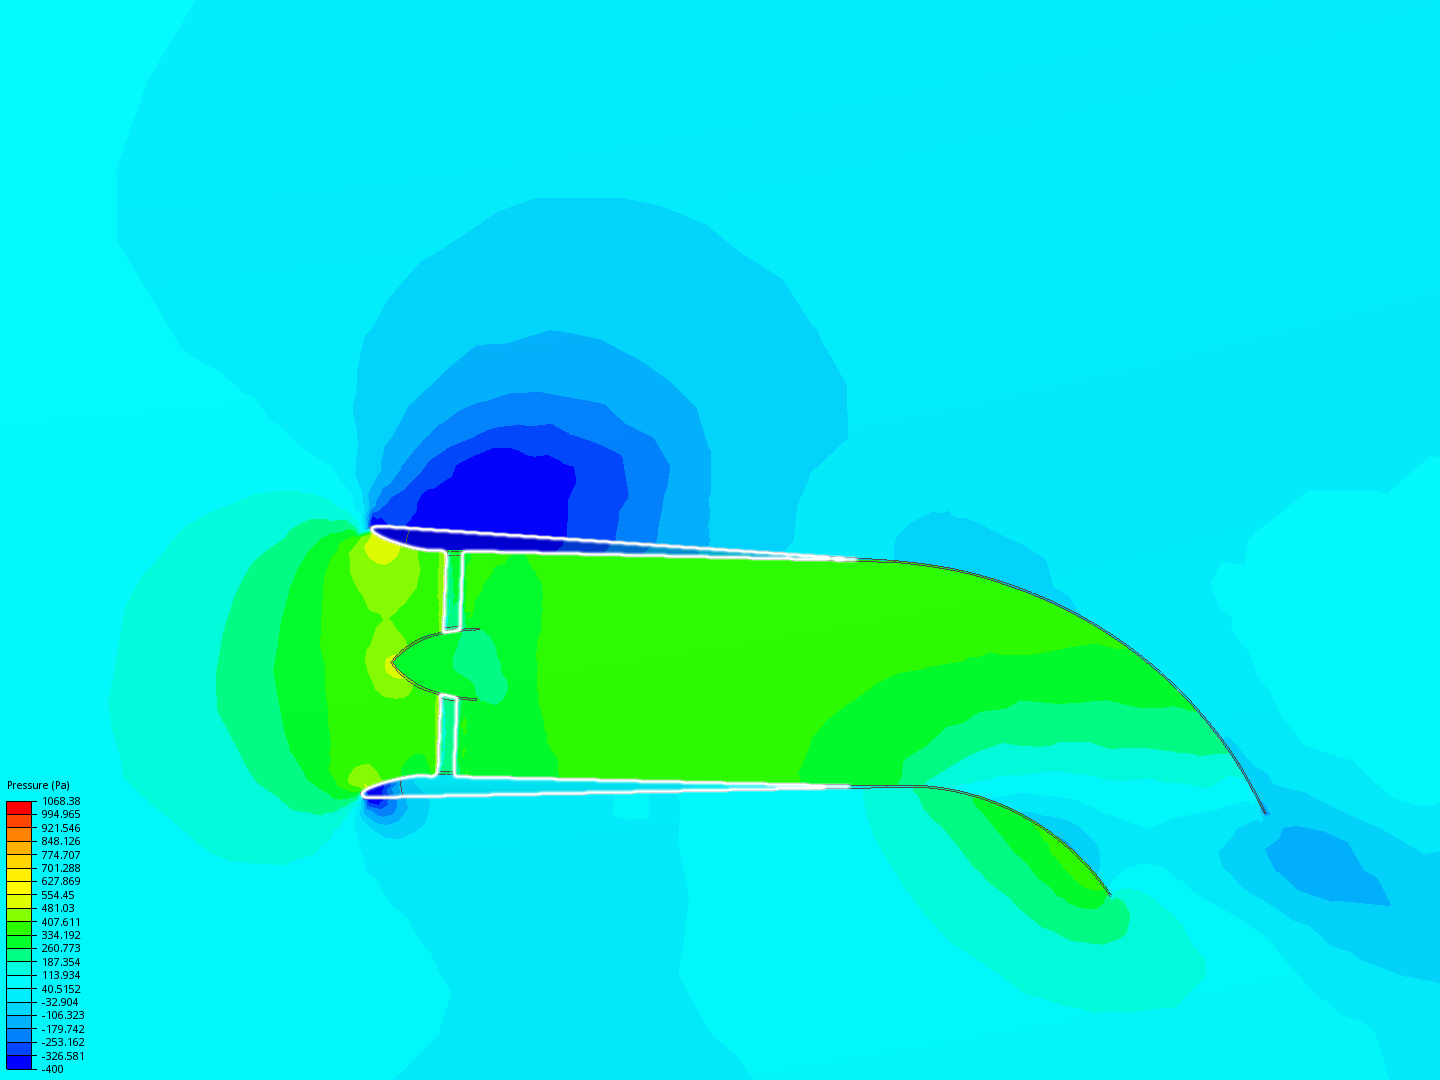 Ducted fan embeded in a wing image